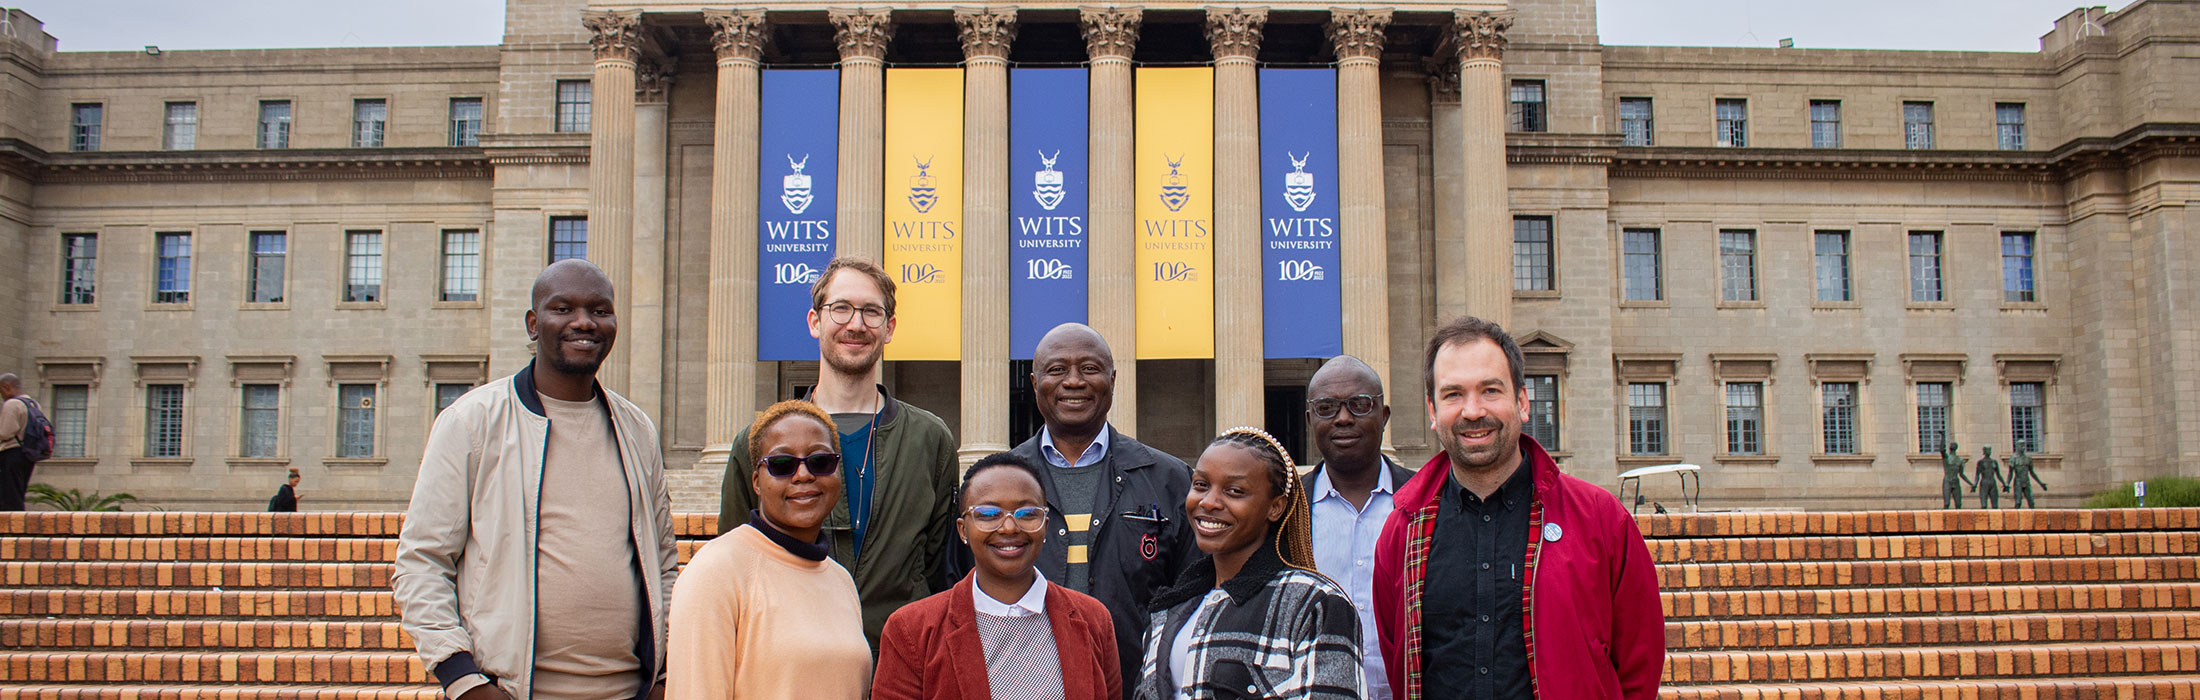 Summer school participants in front of the Wits Great Hall